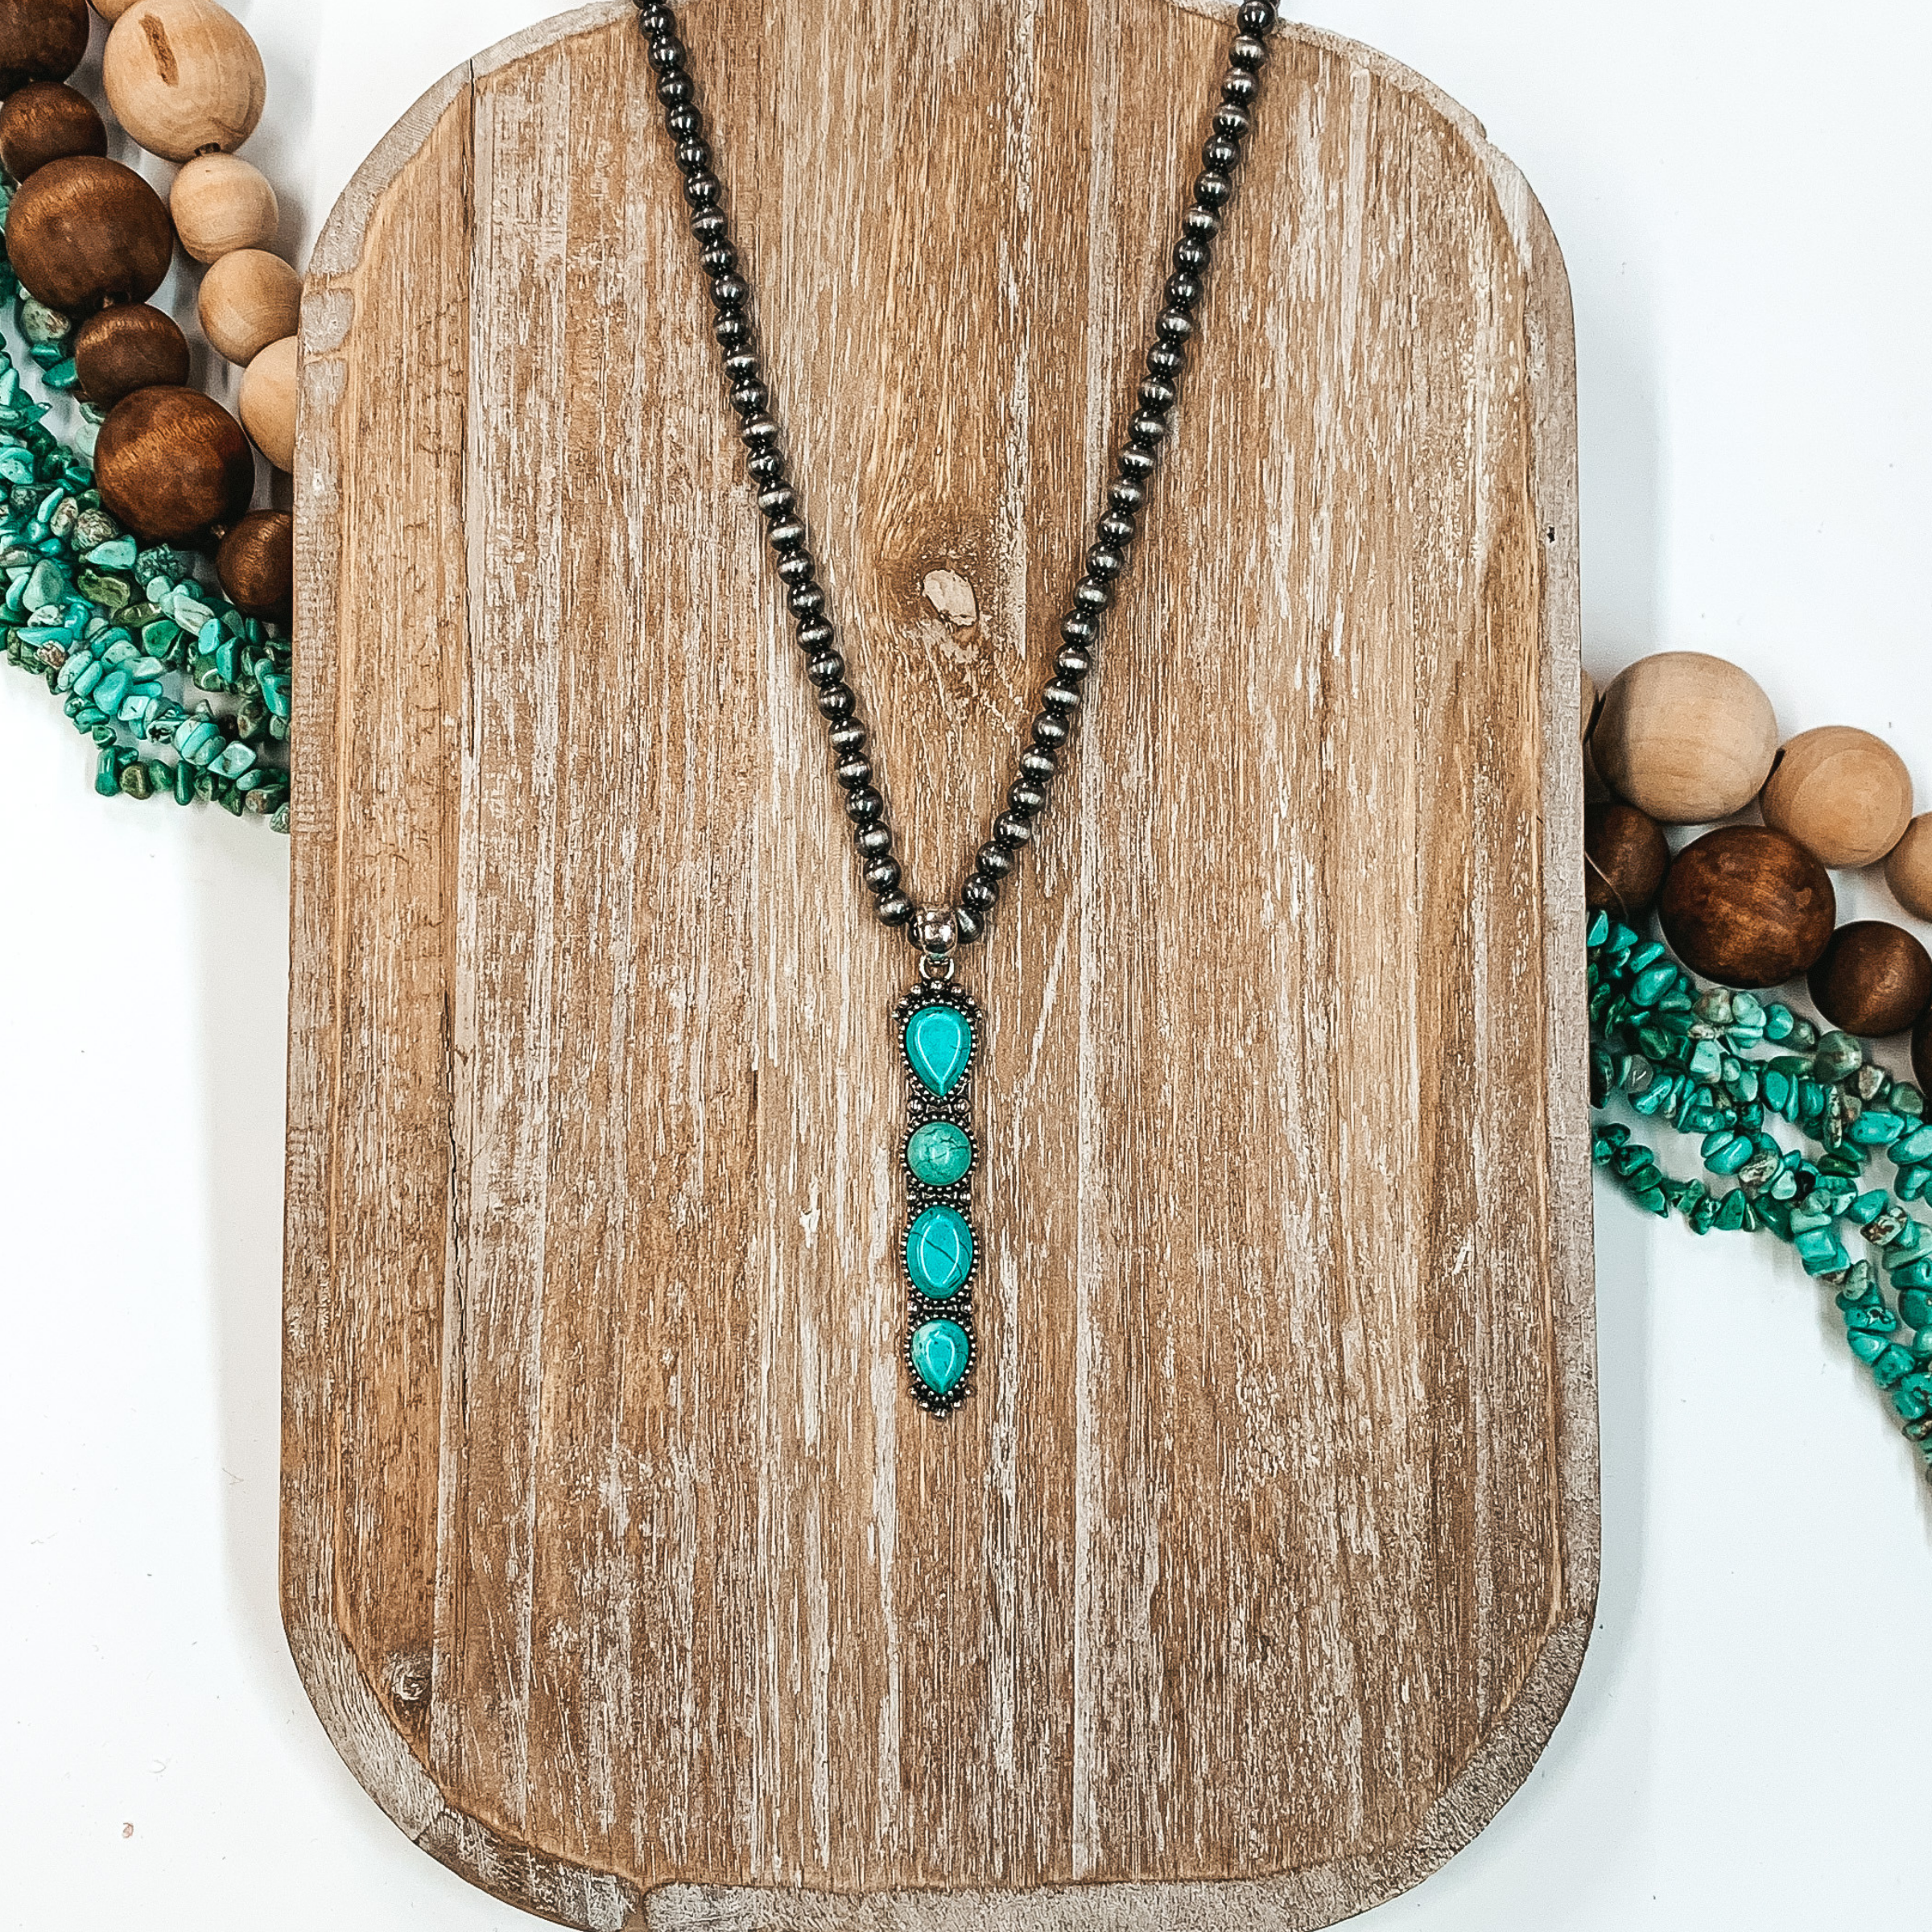 Lariat Inspired Pendant Necklace in Turquoise - Giddy Up Glamour Boutique